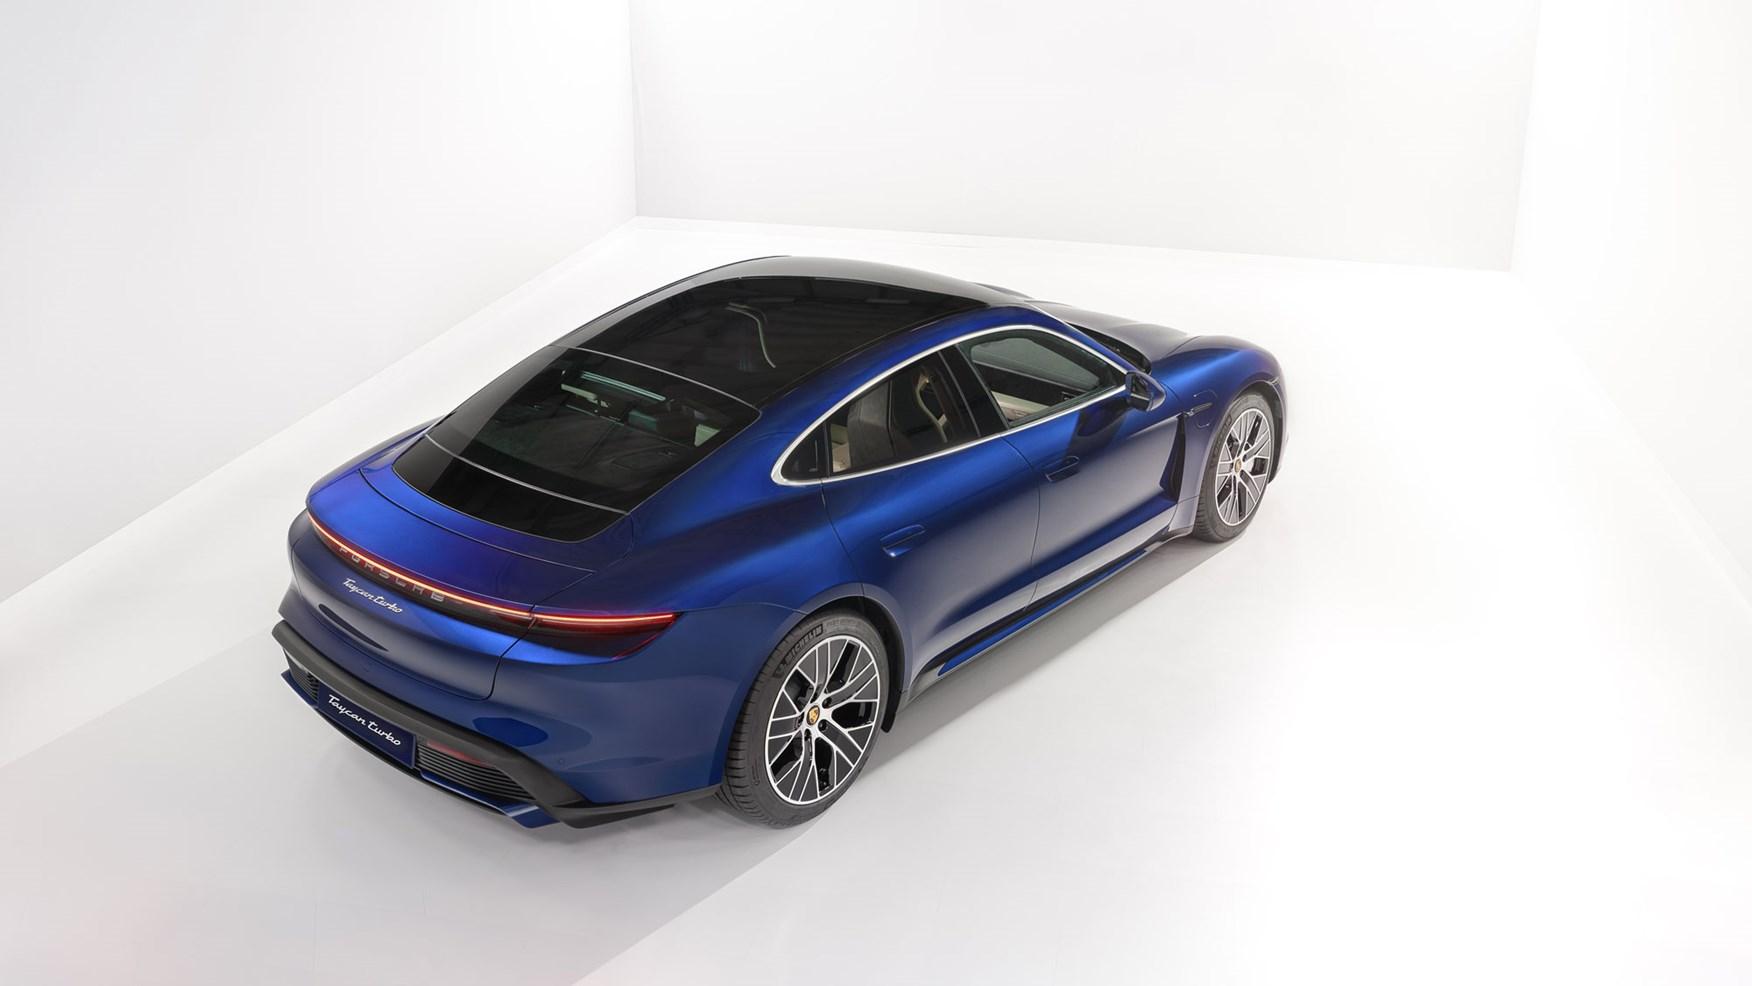 New cheaper 2wd Porsche Taycan electric car on the way soon. CAR